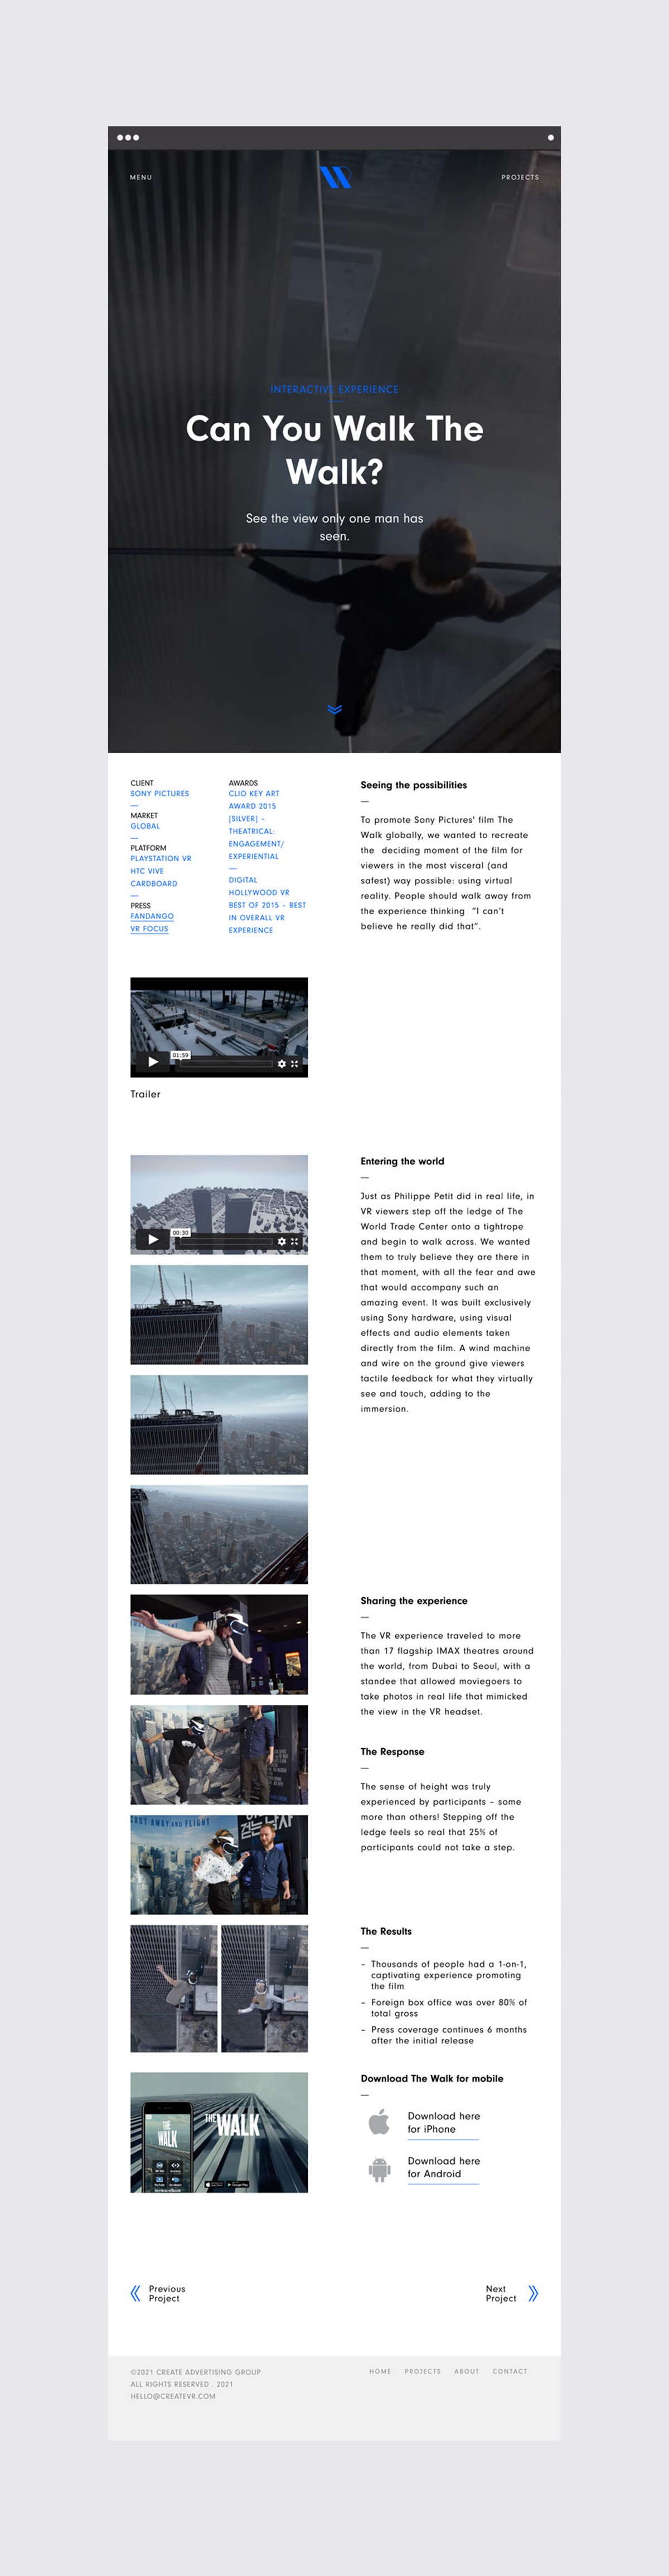 Create VR. Website. The Walk case study page. Design by Superfried. Developed by Cotton.